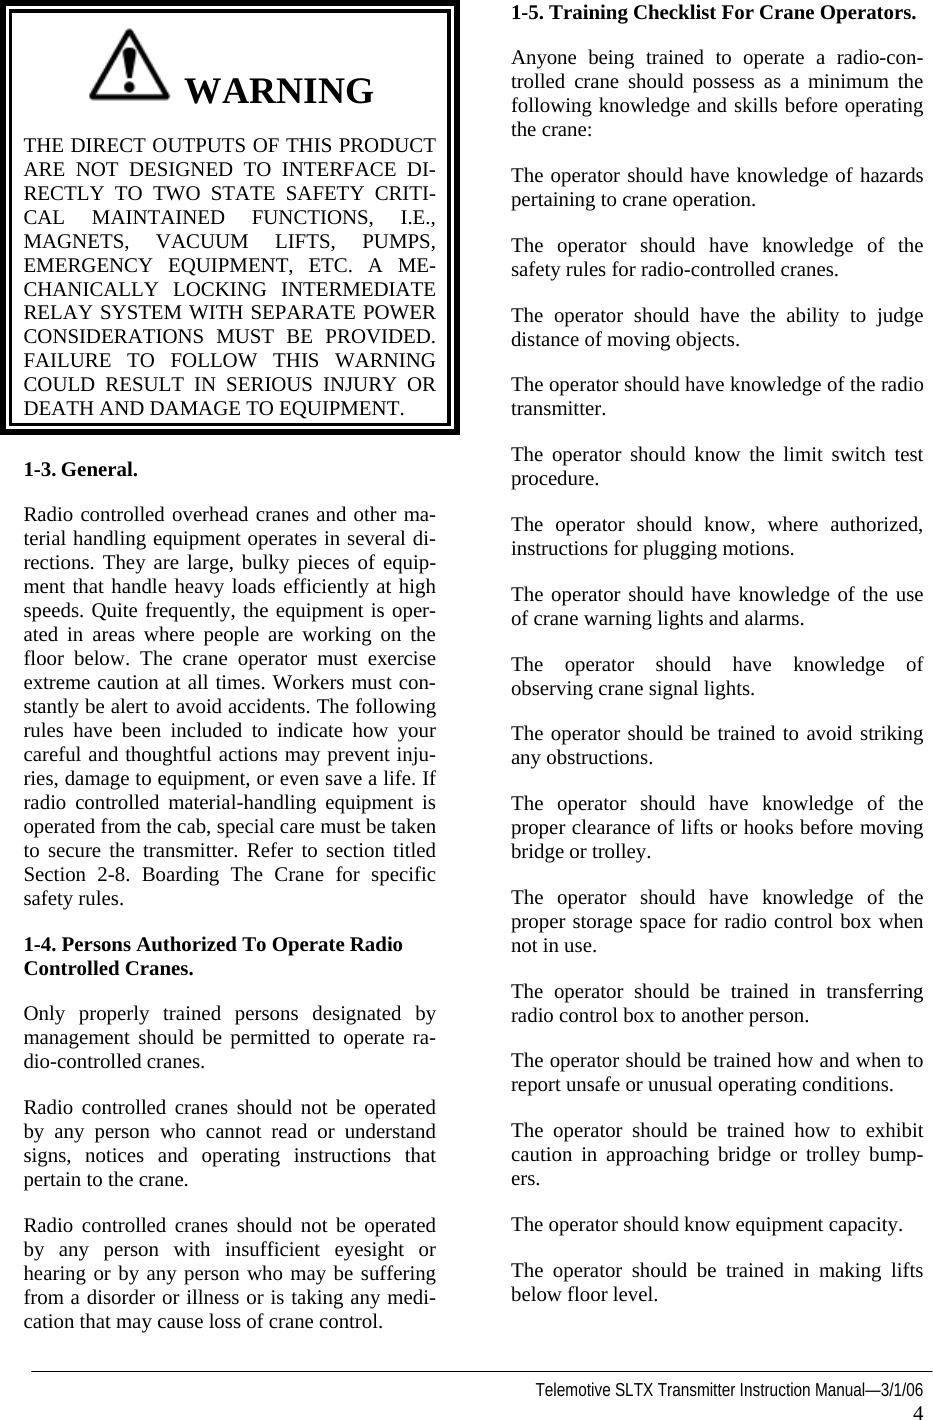   Telemotive SLTX Transmitter Instruction Manual—3/1/06 4   WARNING THE DIRECT OUTPUTS OF THIS PRODUCT ARE NOT DESIGNED TO INTERFACE DI-RECTLY TO TWO STATE SAFETY CRITI-CAL MAINTAINED FUNCTIONS, I.E., MAGNETS, VACUUM LIFTS, PUMPS, EMERGENCY EQUIPMENT, ETC. A ME-CHANICALLY LOCKING INTERMEDIATE RELAY SYSTEM WITH SEPARATE POWER CONSIDERATIONS MUST BE PROVIDED. FAILURE TO FOLLOW THIS WARNING COULD RESULT IN SERIOUS INJURY OR DEATH AND DAMAGE TO EQUIPMENT. 1-3. General. Radio controlled overhead cranes and other ma-terial handling equipment operates in several di-rections. They are large, bulky pieces of equip-ment that handle heavy loads efficiently at high speeds. Quite frequently, the equipment is oper-ated in areas where people are working on the floor below. The crane operator must exercise extreme caution at all times. Workers must con-stantly be alert to avoid accidents. The following rules have been included to indicate how your careful and thoughtful actions may prevent inju-ries, damage to equipment, or even save a life. If radio controlled material-handling equipment is operated from the cab, special care must be taken to secure the transmitter. Refer to section titled Section 2-8. Boarding The Crane for specific safety rules. 1-4. Persons Authorized To Operate Radio Controlled Cranes. Only properly trained persons designated by management should be permitted to operate ra-dio-controlled cranes. Radio controlled cranes should not be operated by any person who cannot read or understand signs, notices and operating instructions that pertain to the crane. Radio controlled cranes should not be operated by any person with insufficient eyesight or hearing or by any person who may be suffering from a disorder or illness or is taking any medi-cation that may cause loss of crane control. 1-5. Training Checklist For Crane Operators. Anyone being trained to operate a radio-con-trolled crane should possess as a minimum the following knowledge and skills before operating the crane: The operator should have knowledge of hazards pertaining to crane operation. The operator should have knowledge of the safety rules for radio-controlled cranes. The operator should have the ability to judge distance of moving objects. The operator should have knowledge of the radio transmitter. The operator should know the limit switch test procedure. The operator should know, where authorized, instructions for plugging motions. The operator should have knowledge of the use of crane warning lights and alarms. The operator should have knowledge of observing crane signal lights. The operator should be trained to avoid striking any obstructions. The operator should have knowledge of the proper clearance of lifts or hooks before moving bridge or trolley. The operator should have knowledge of the proper storage space for radio control box when not in use. The operator should be trained in transferring radio control box to another person. The operator should be trained how and when to report unsafe or unusual operating conditions. The operator should be trained how to exhibit caution in approaching bridge or trolley bump-ers. The operator should know equipment capacity. The operator should be trained in making lifts below floor level. 